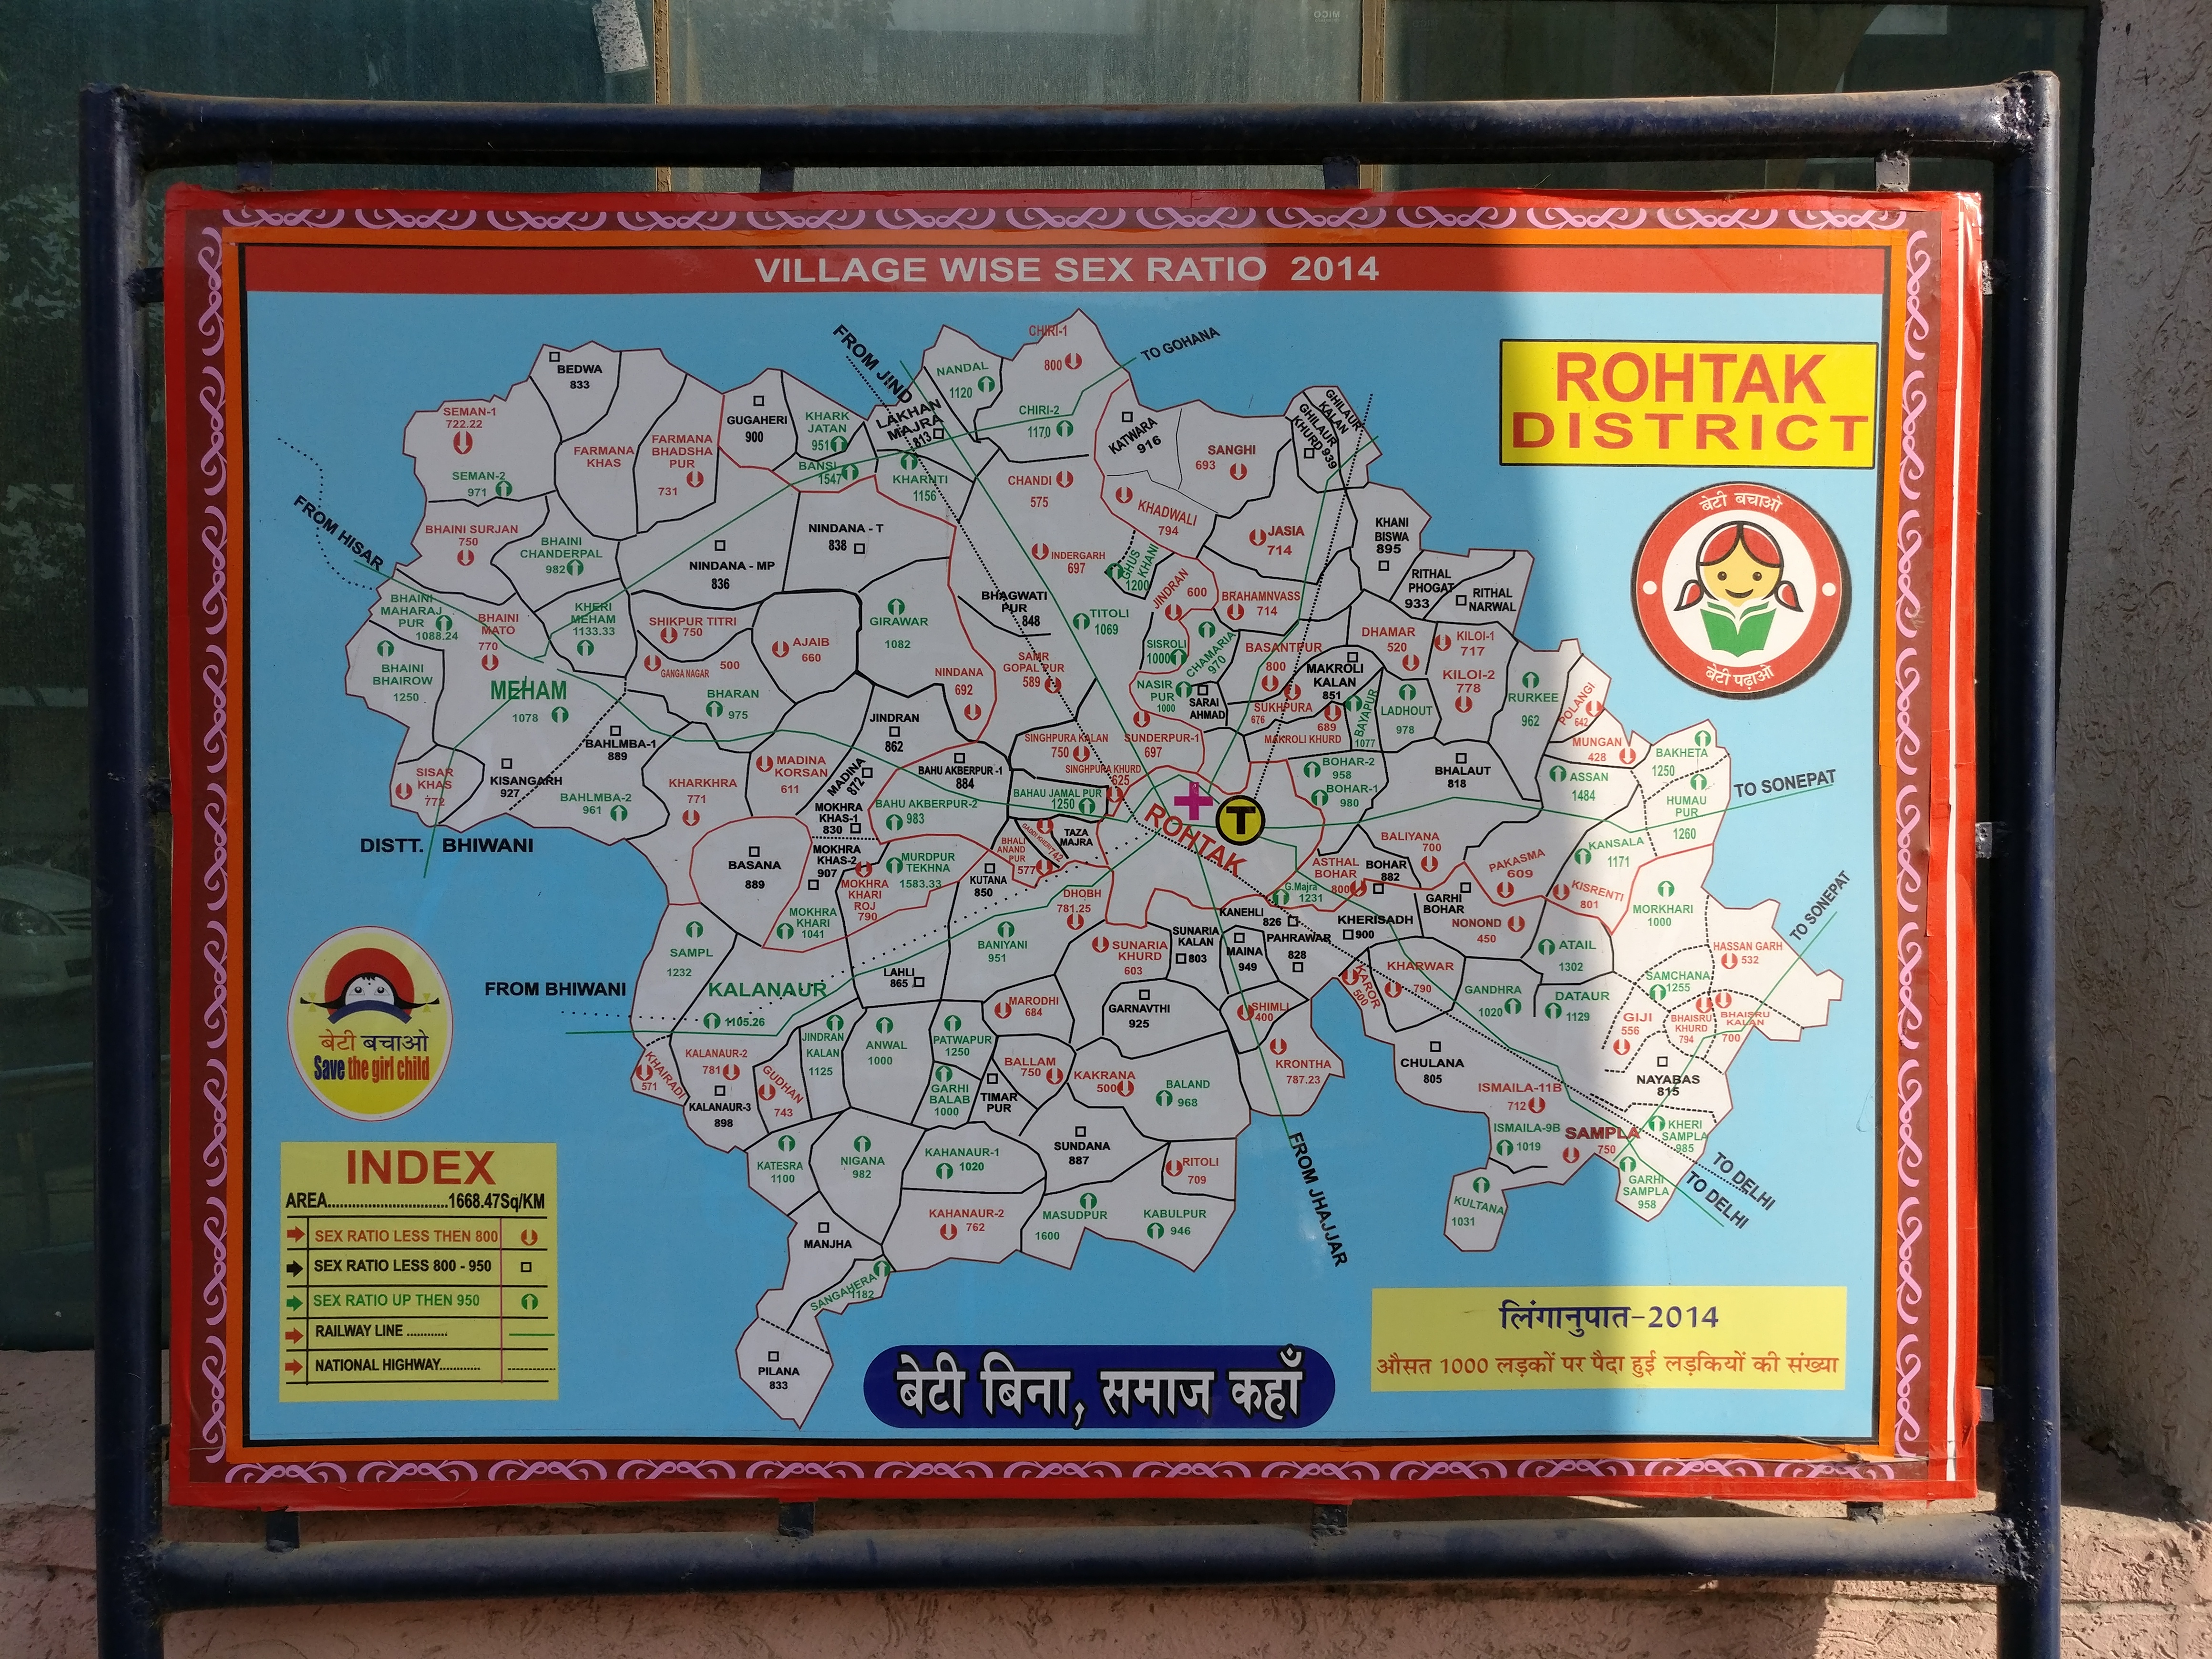 a board displays sex ratios in Rohtak district